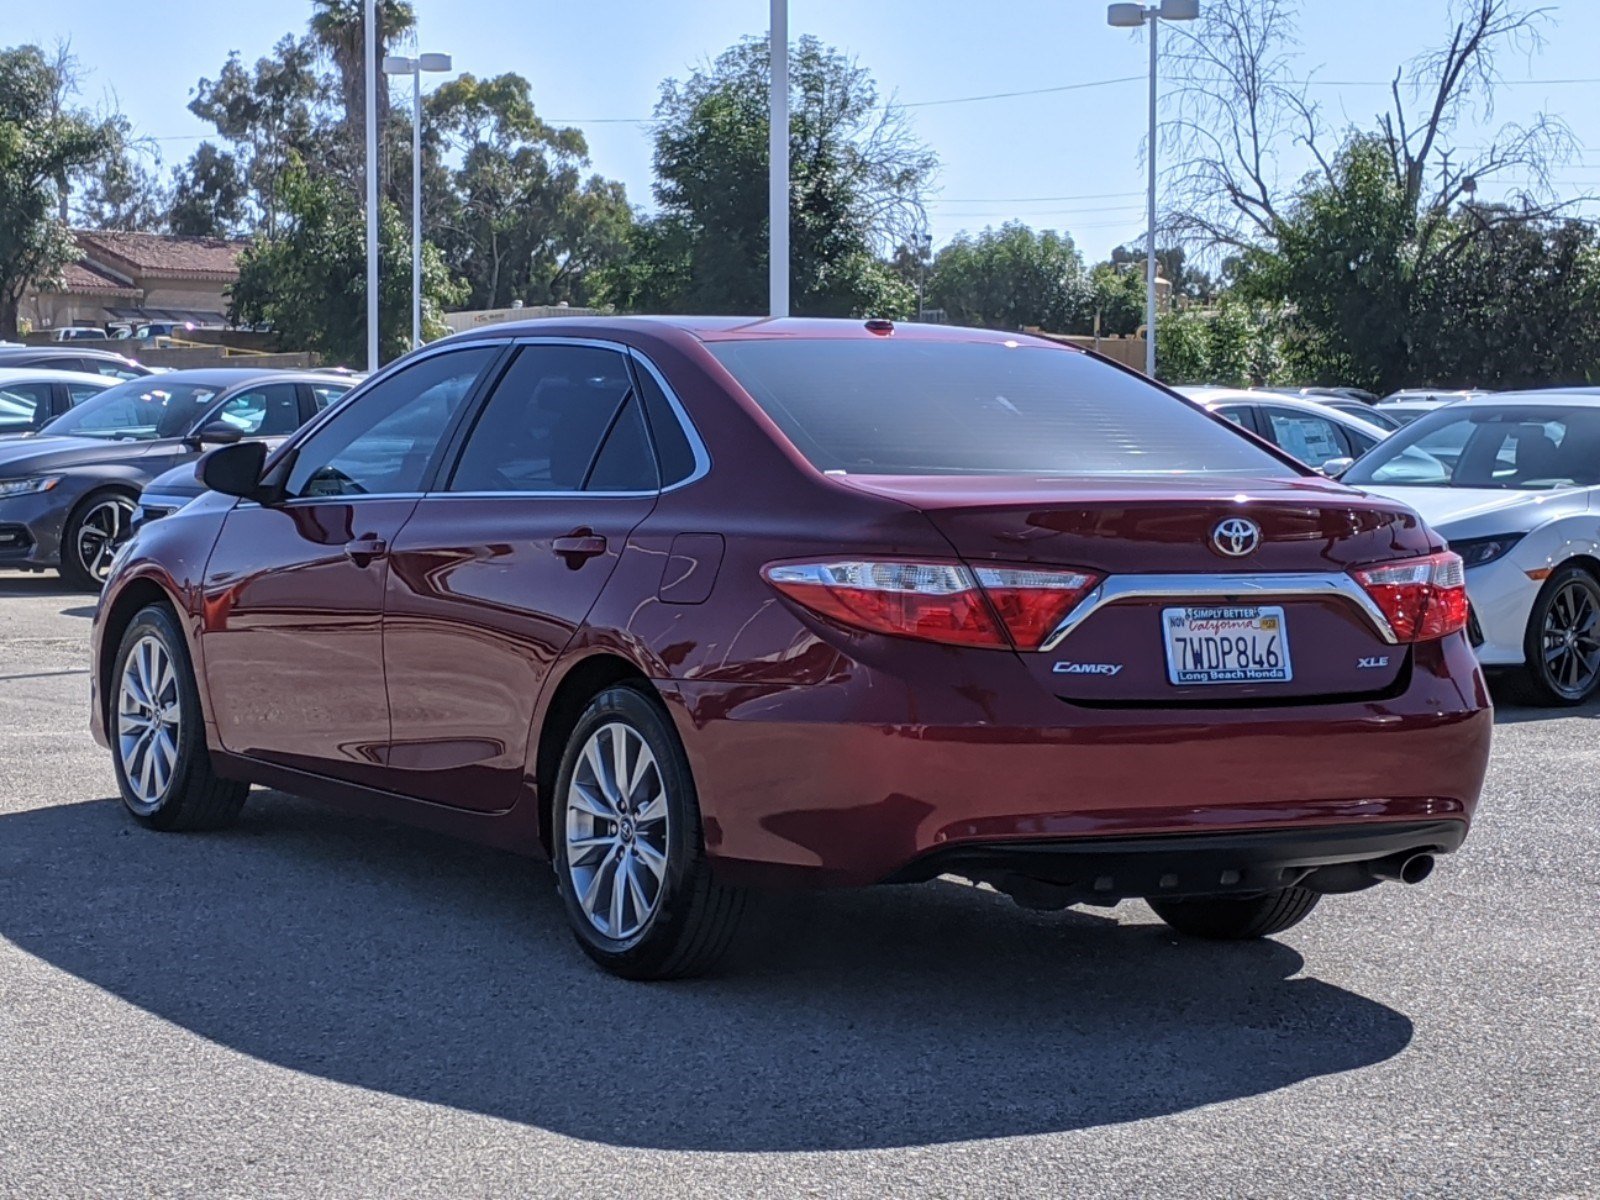 Pre-Owned 2017 Toyota Camry XSE 4dr Car in Signal Hill #16528T | Long ...